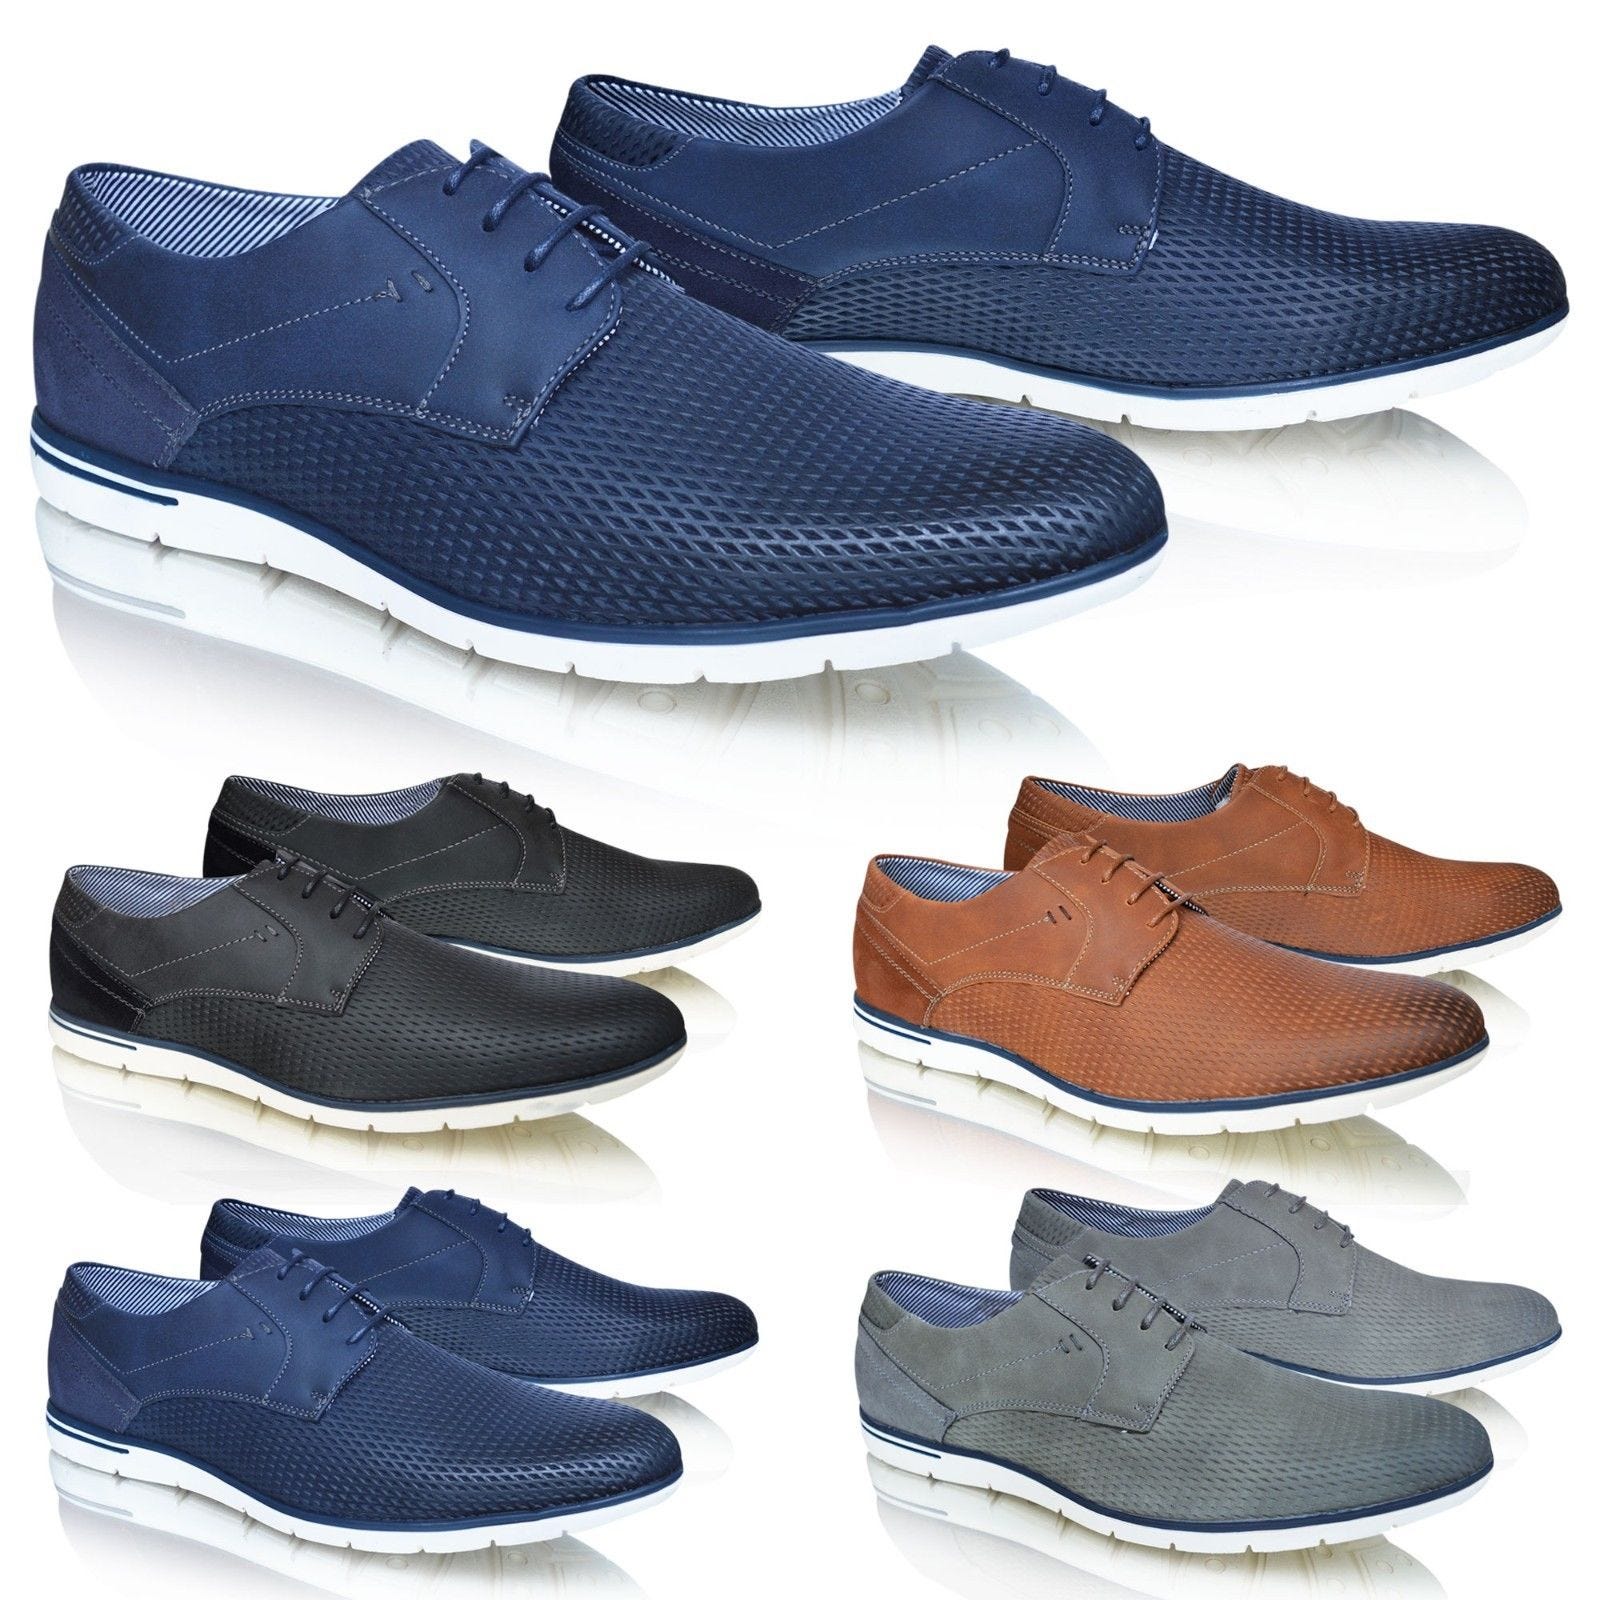 corporate casual shoes for men